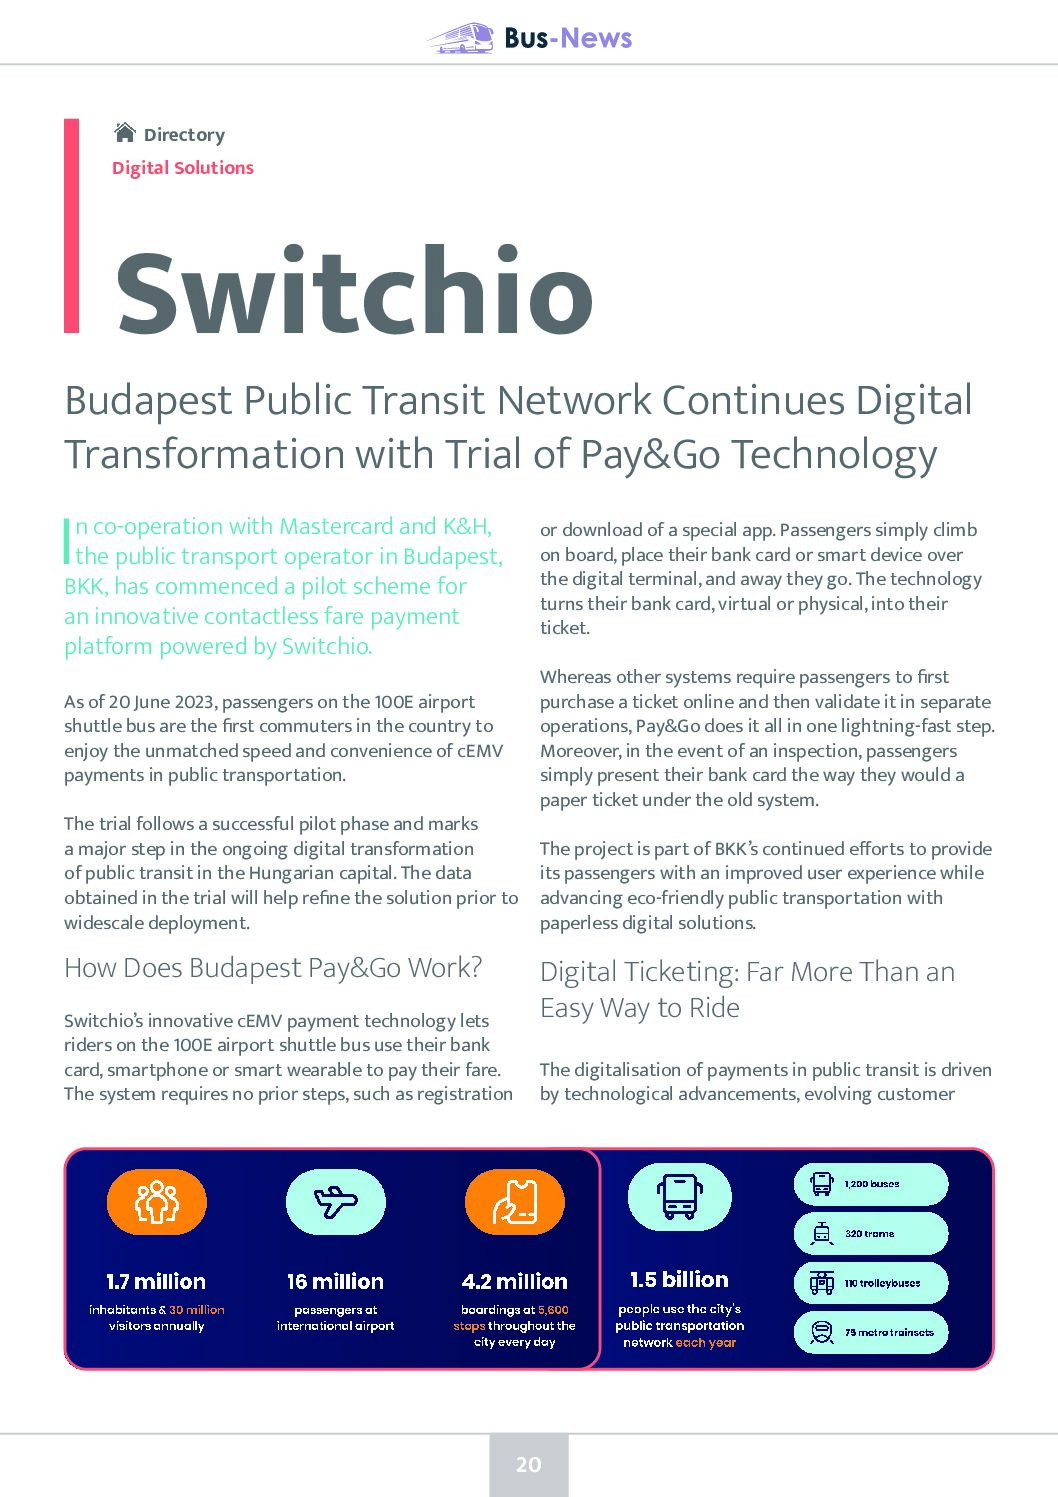 Budapest Public Transit Network Continues Digital Transformation with Trial of Pay&Go Technology